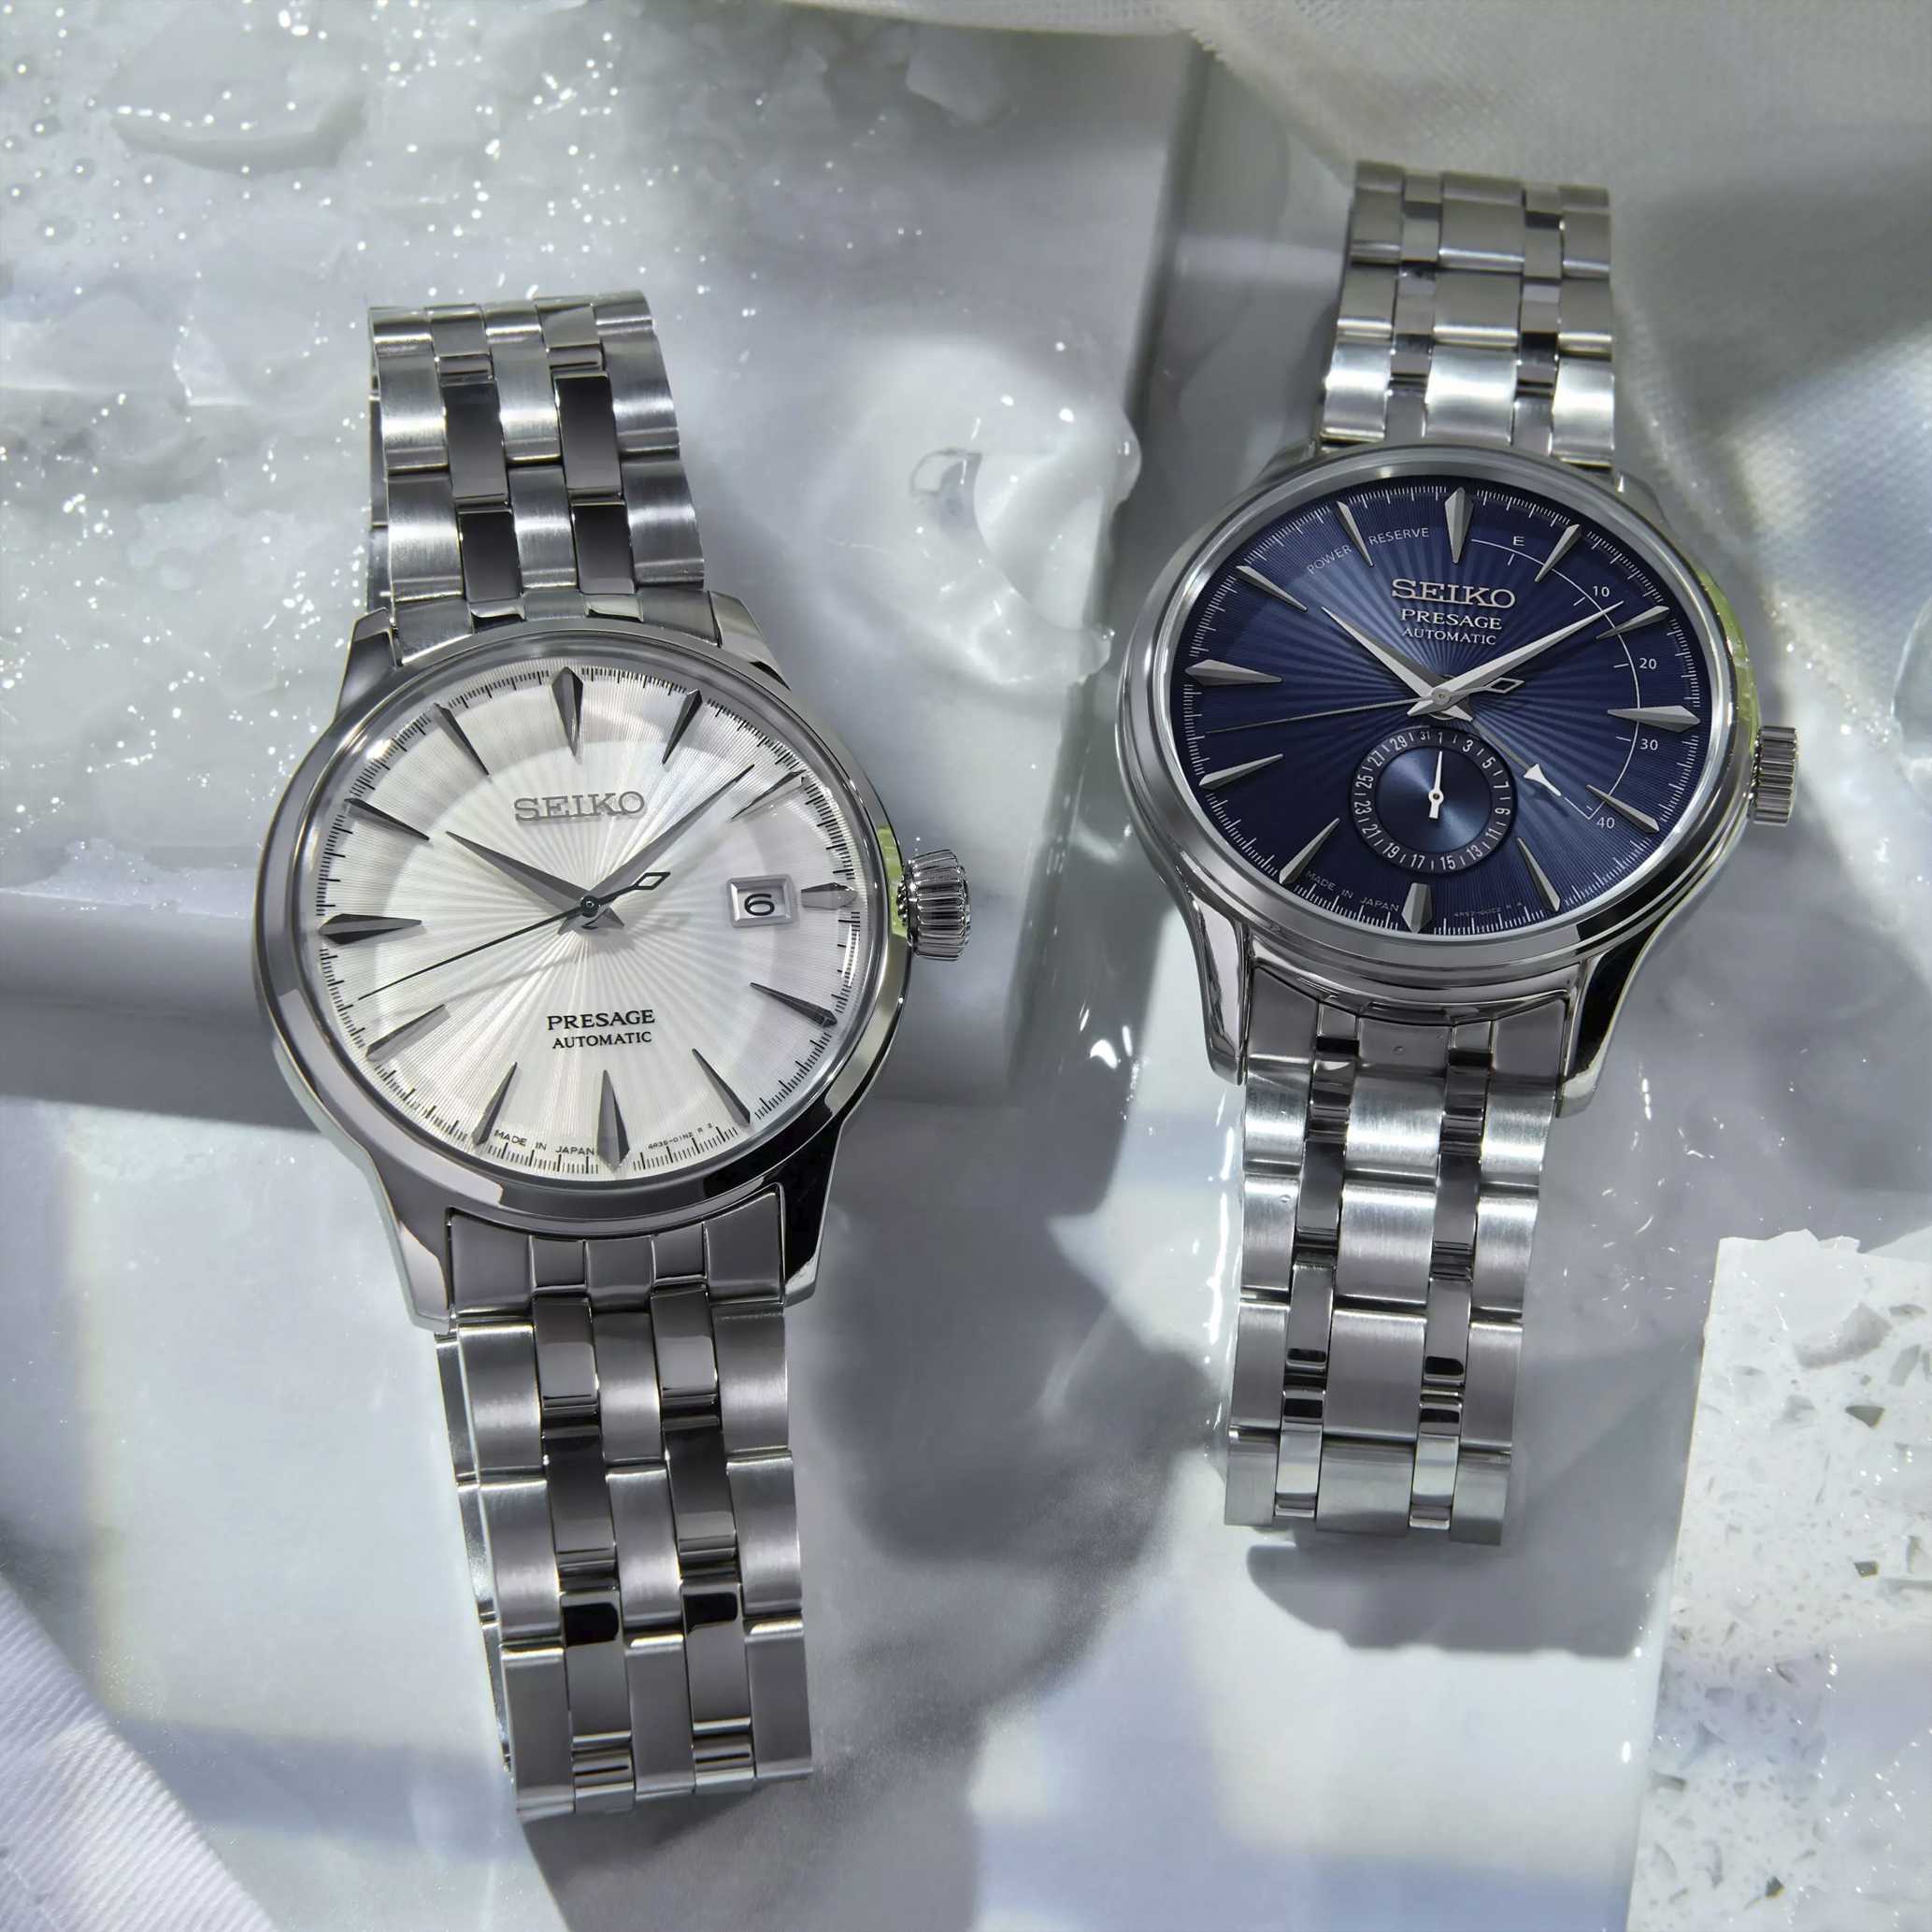 Seiko Presage Watches - Official UK retailer - First Class Watches™ IRL